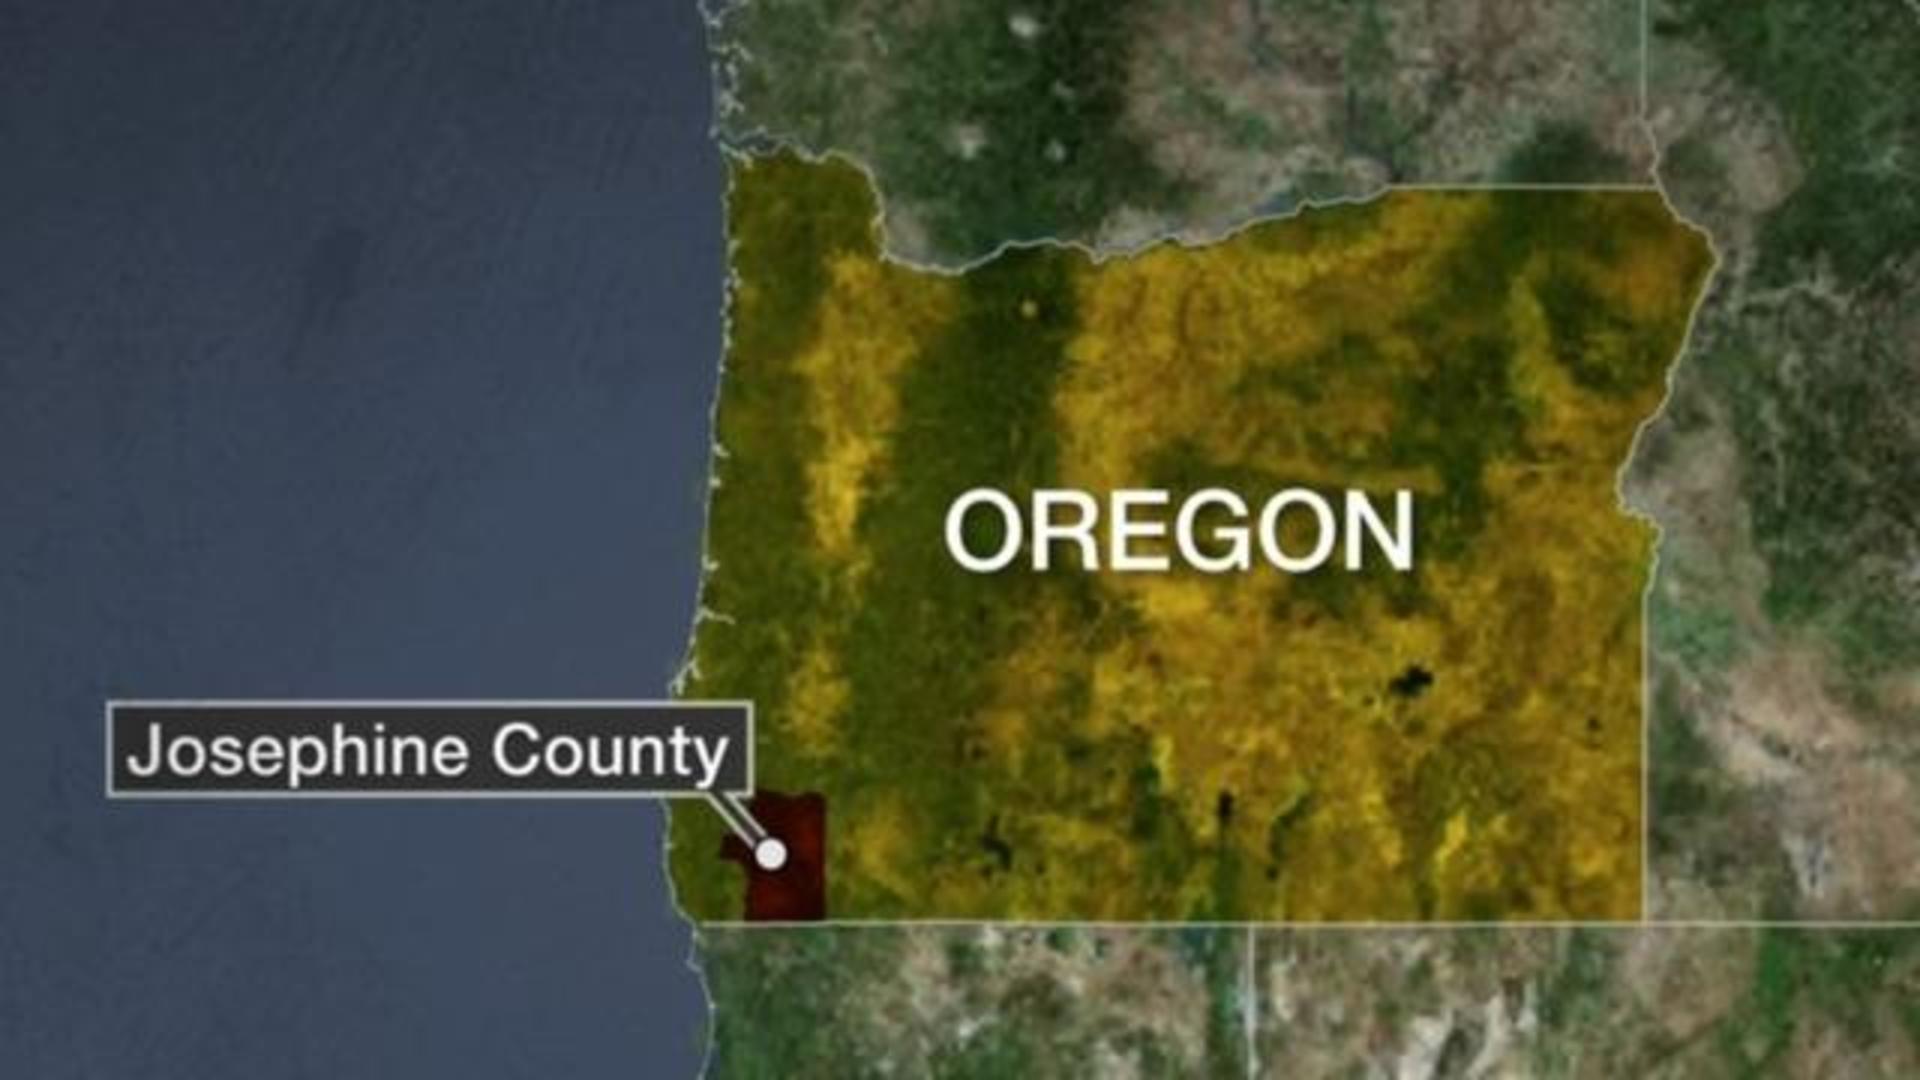 FBI agent shot by booby-trapped wheelchair in Oregon home - CBS News